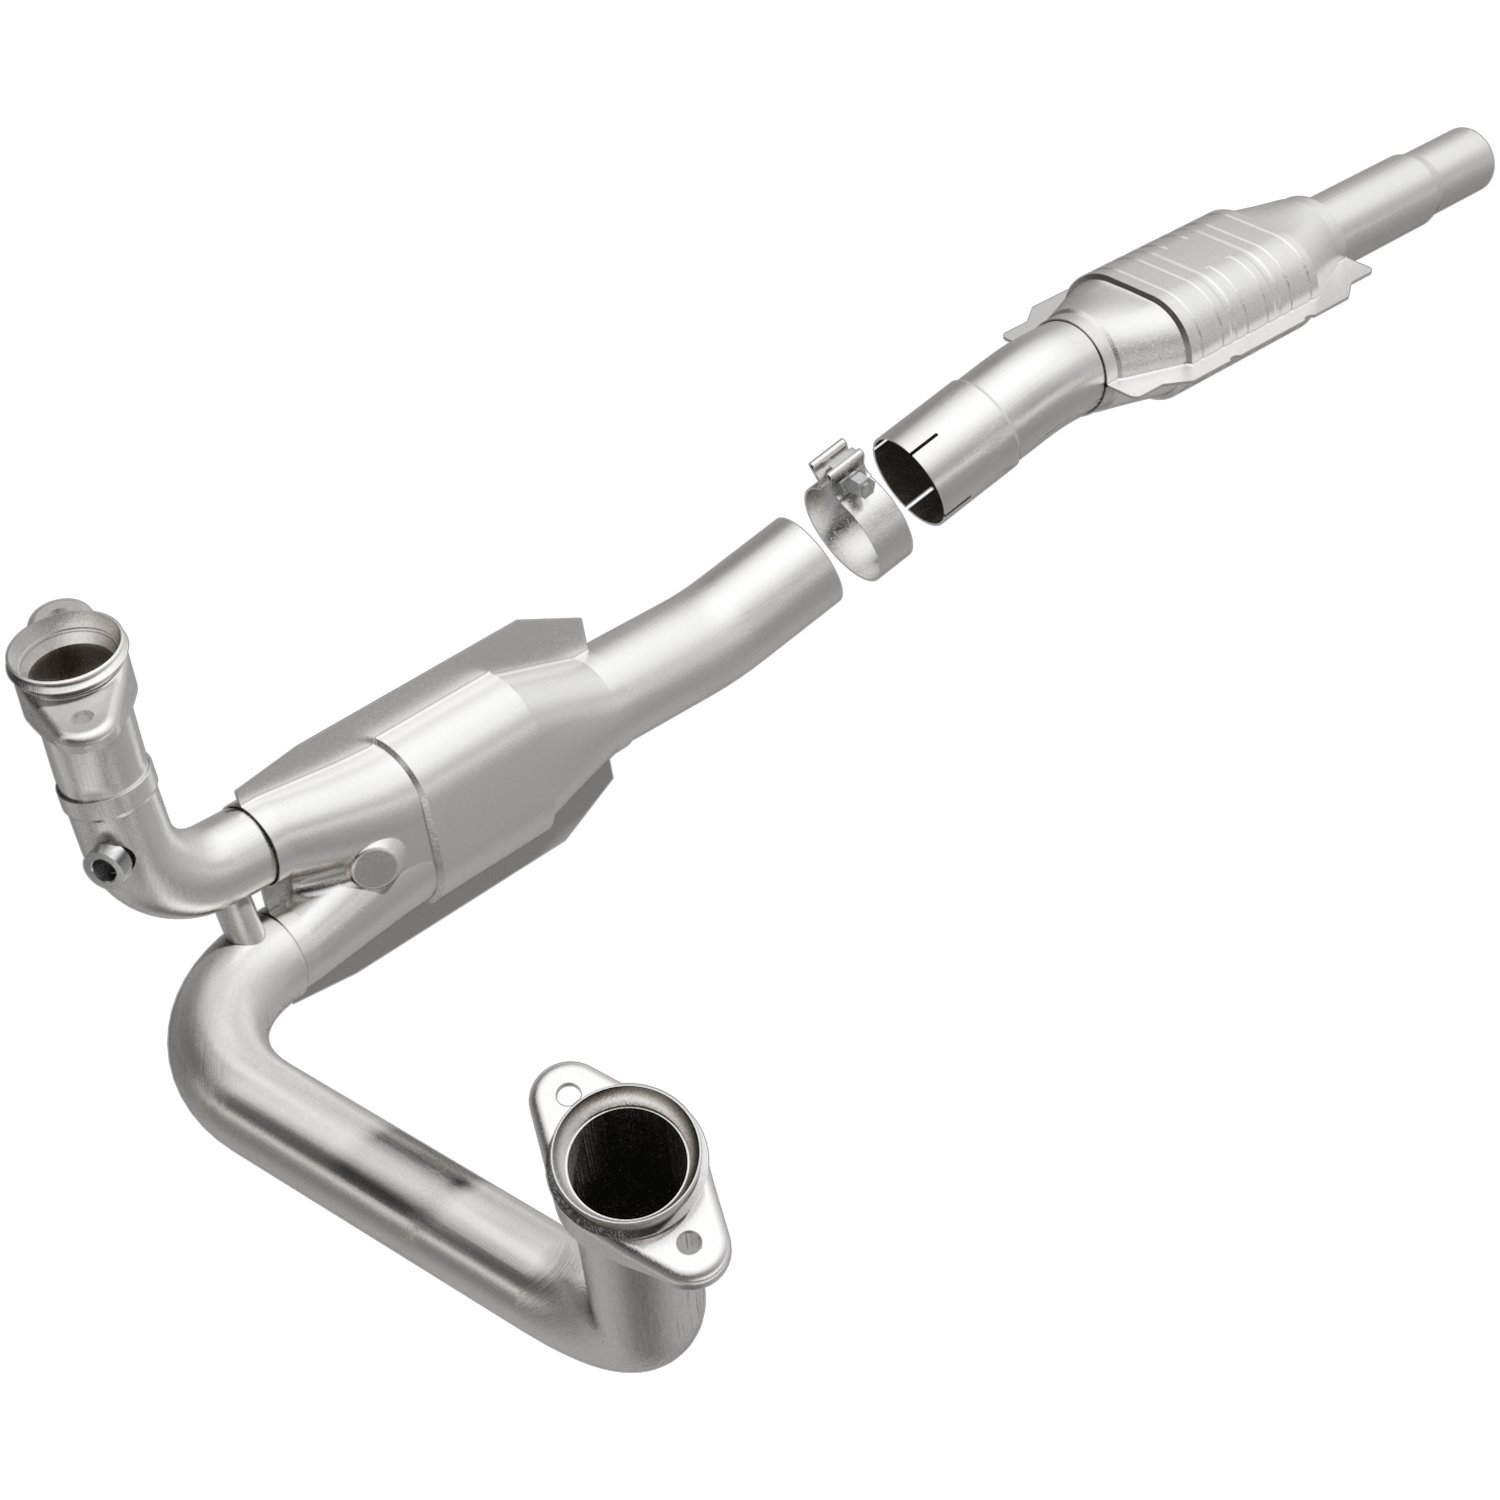 1994-1996 Ford Bronco HM Grade Federal / EPA Compliant Direct-Fit Catalytic Converter